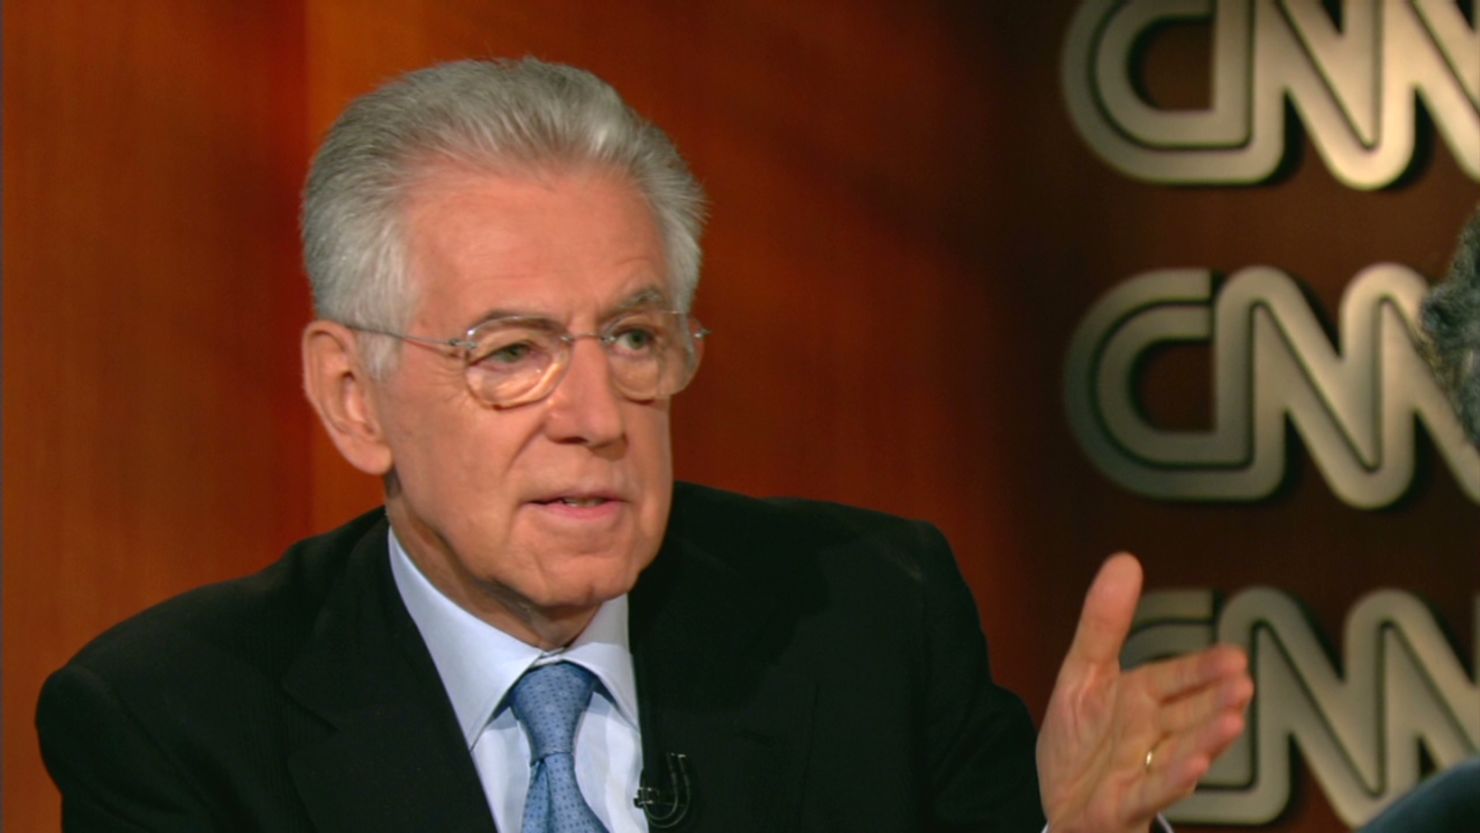 Monti played down suggestions he was about to leap from unelected technocrat to campaigning politician.